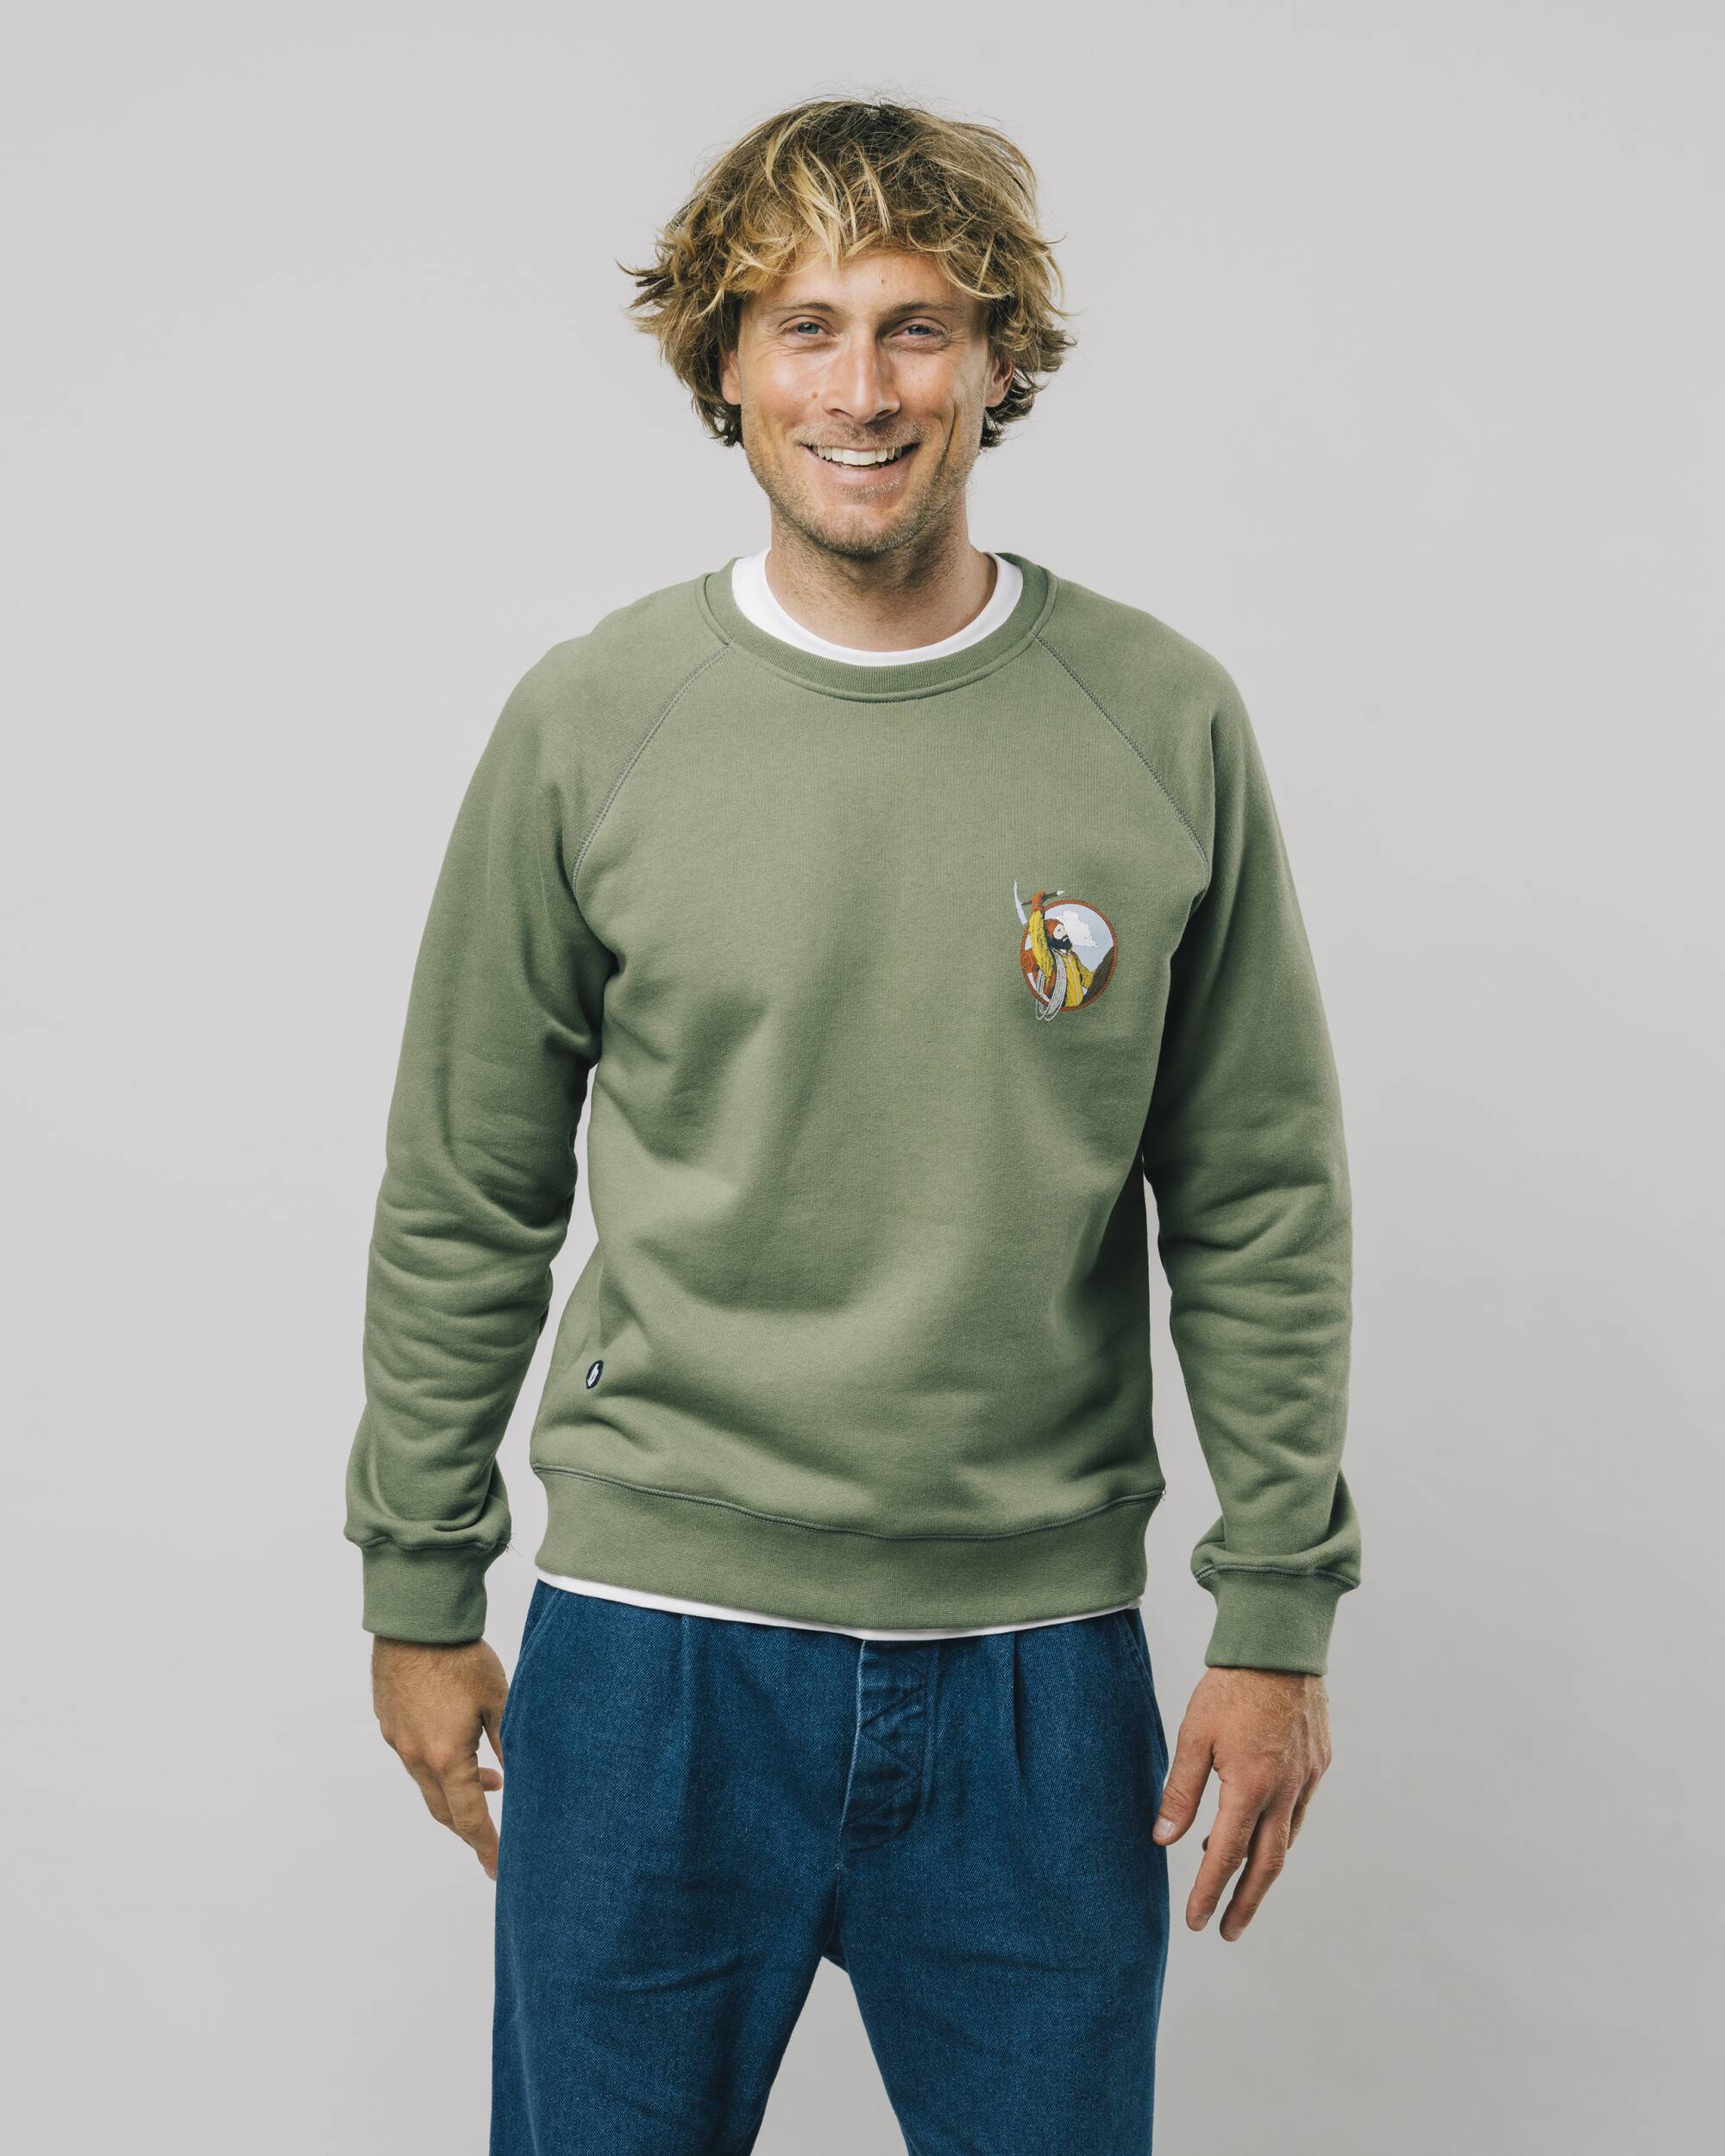 Sweatshirt "The Hiker" in green / olive made from 100% organic cotton from Brava Fabrics